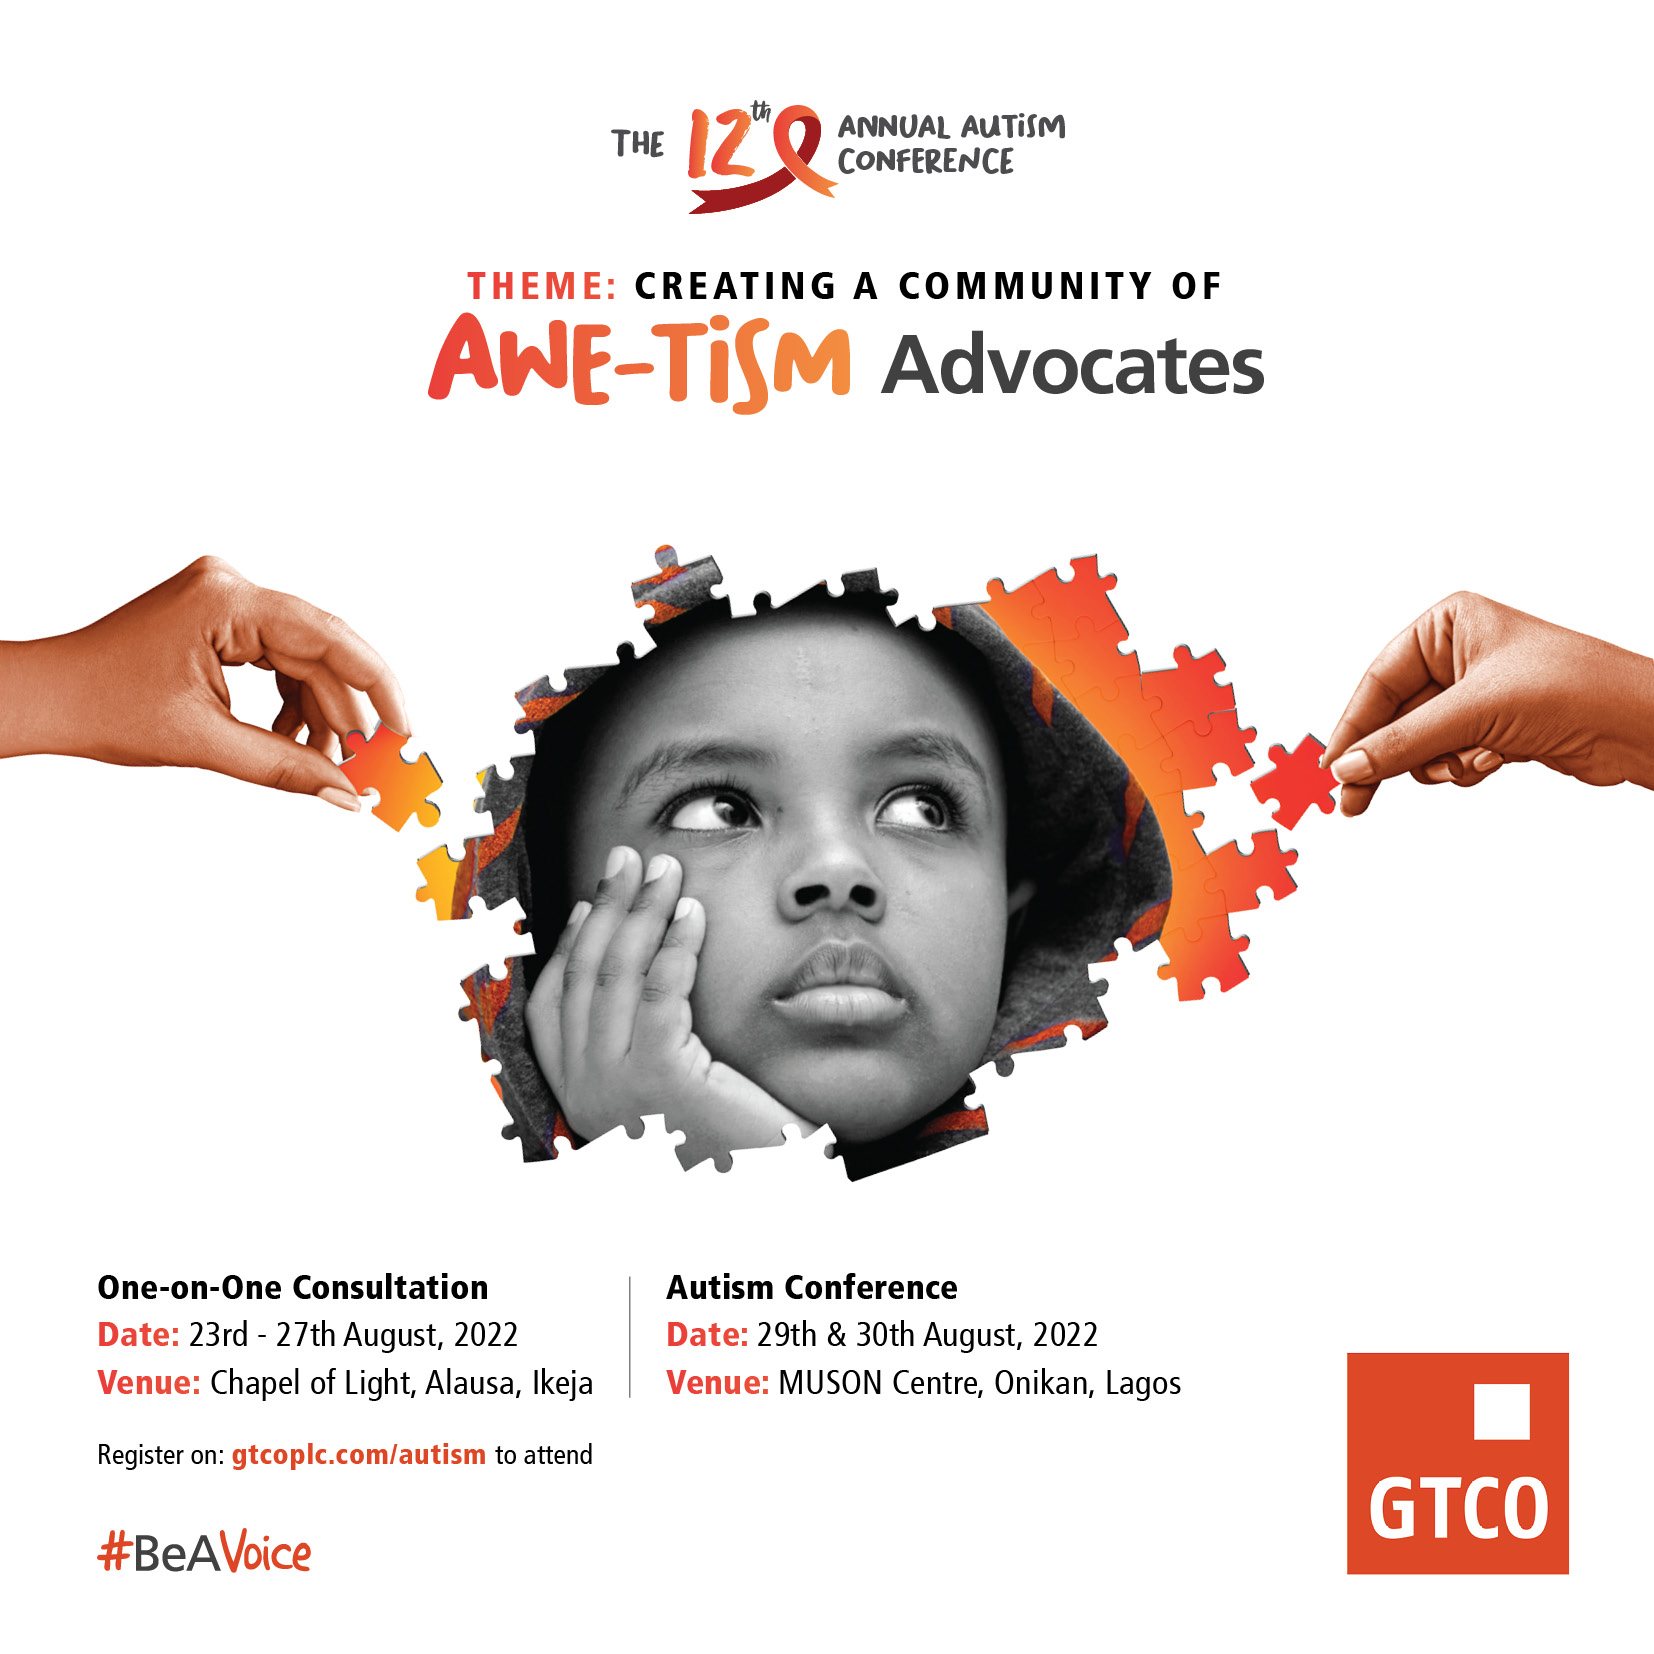 GTCO Autism Conference Holds on August 29th and 30th at MUSON Centre, Onikan, Lagos